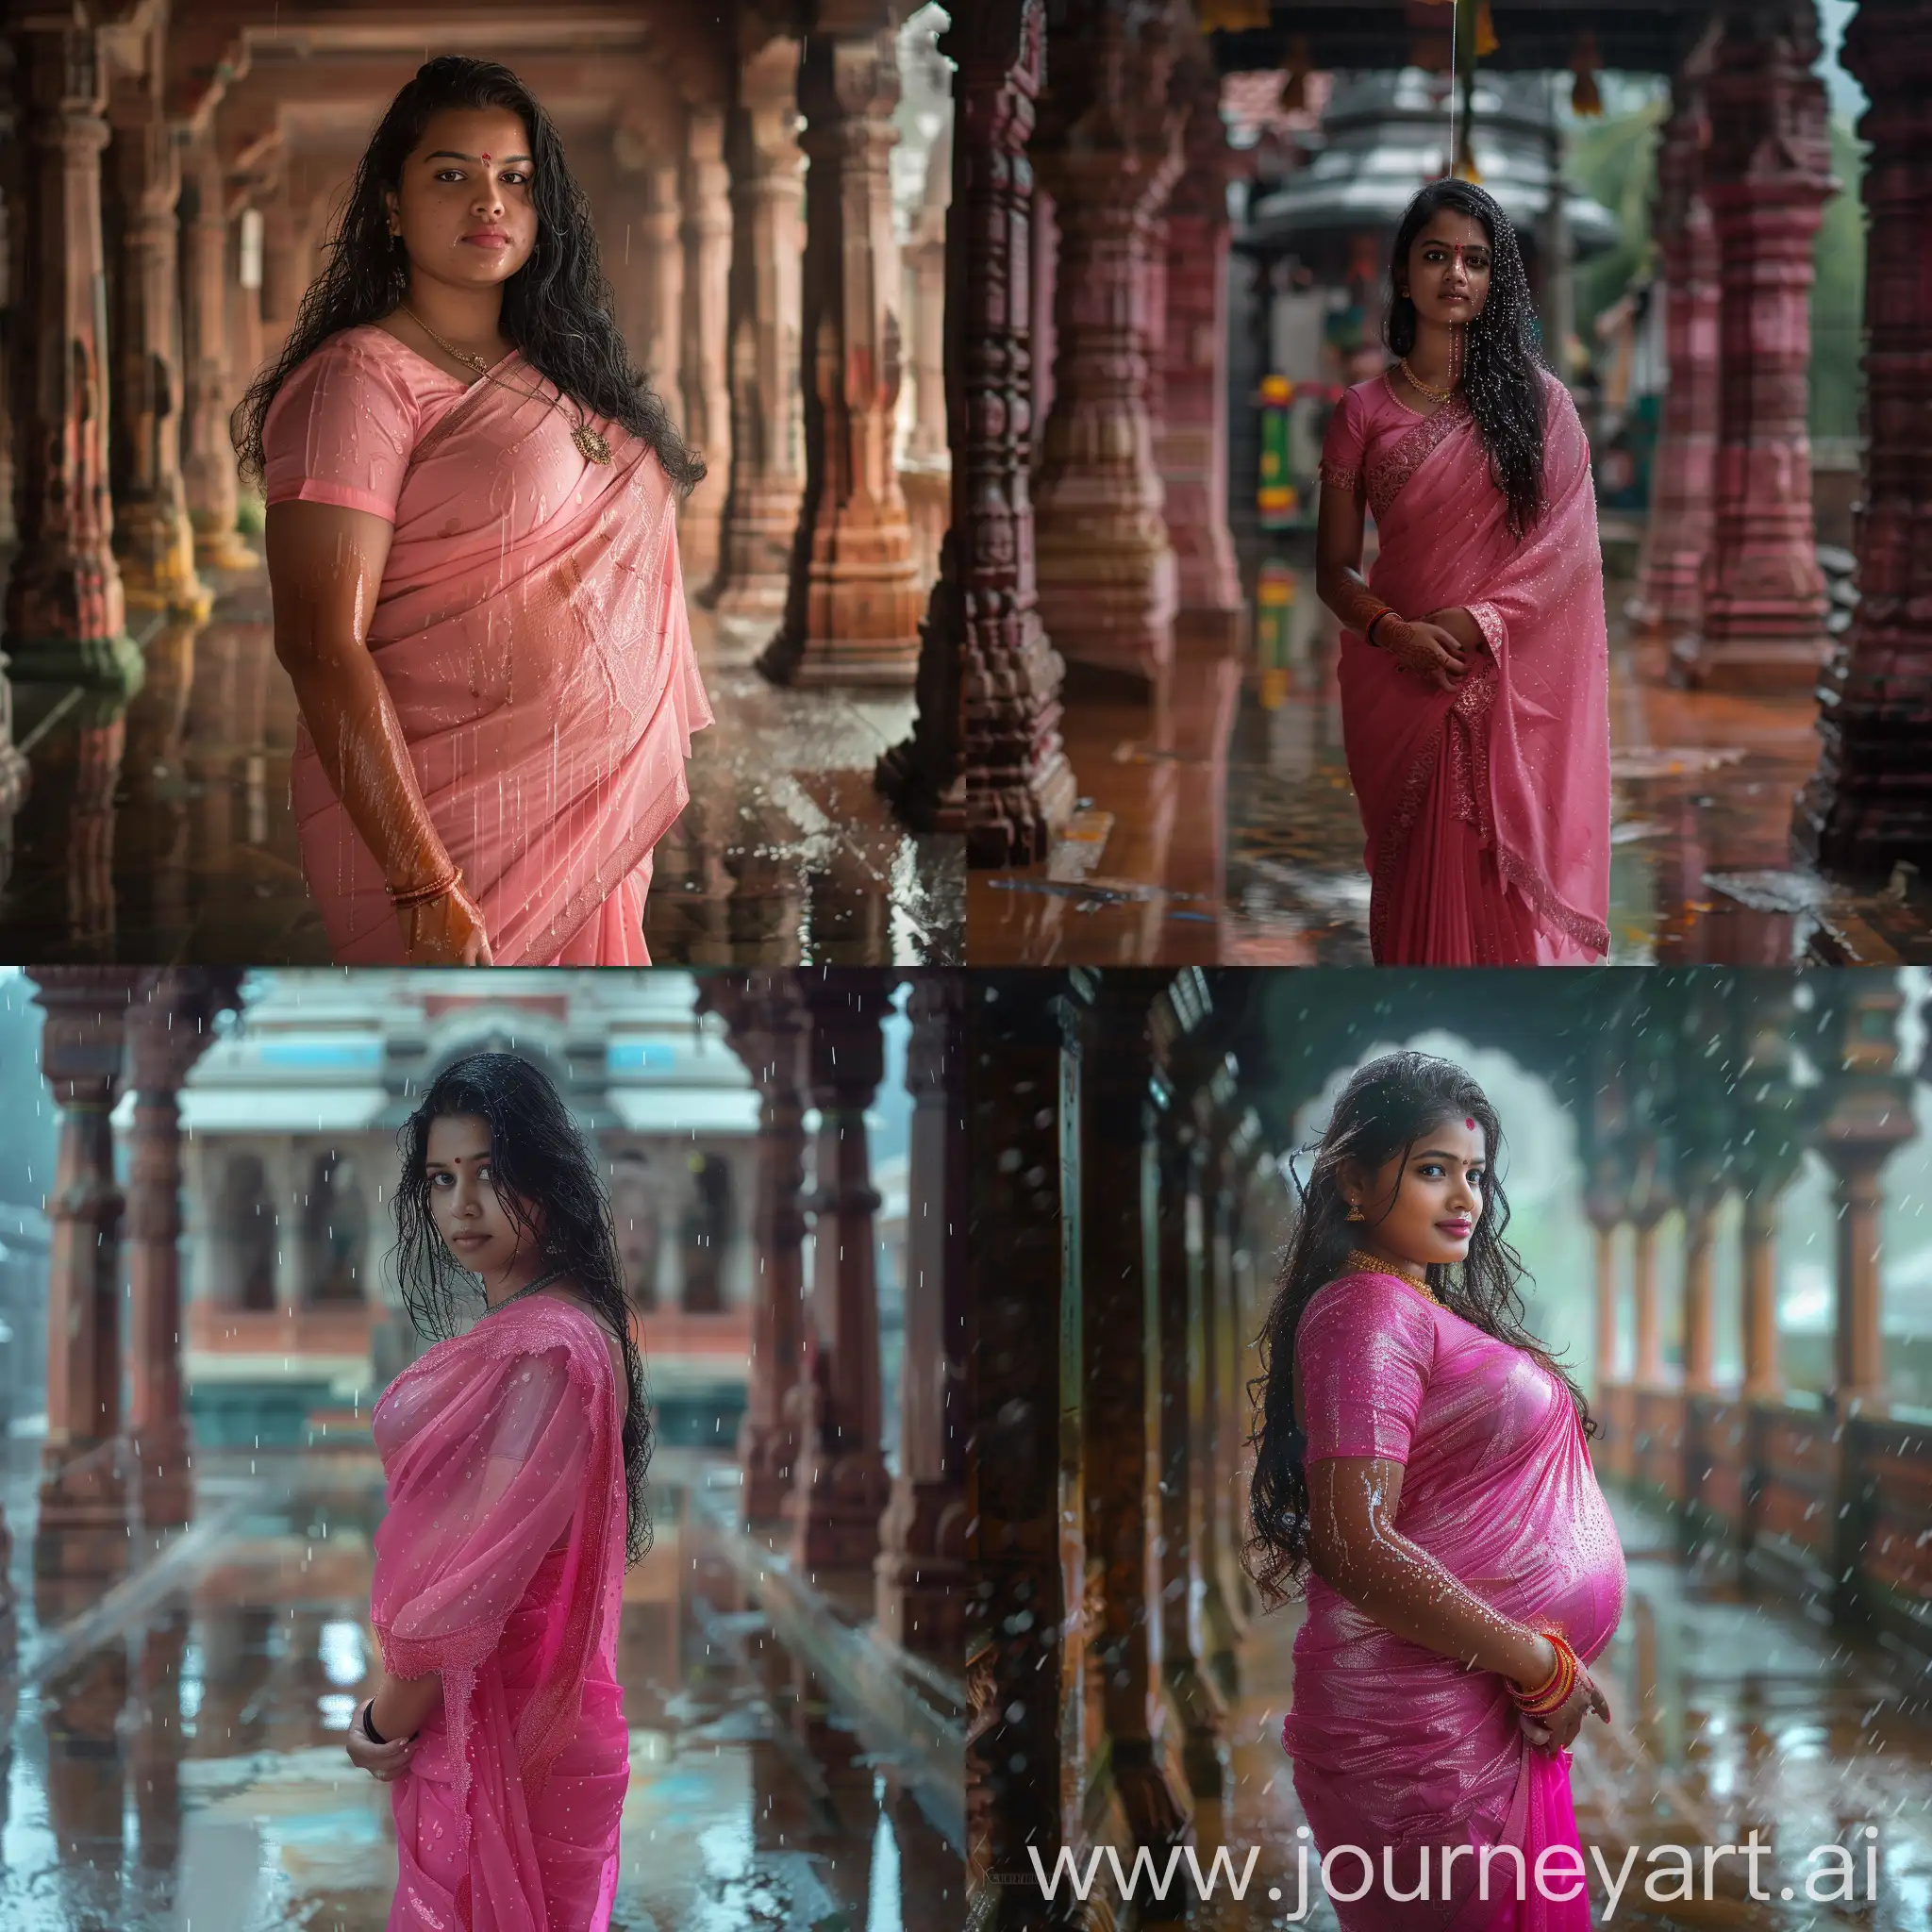 An average, curvy, teenage Tamil girl wearing a classy pink saree on a rainy day in a temple in Kochi, Kerala. She looks stunning, wet and sweet, with honey-dripping charm. The photography is done with a Canon DSLR, half body portrait, waist shot, hyperrealistic image, grandiose, splendor